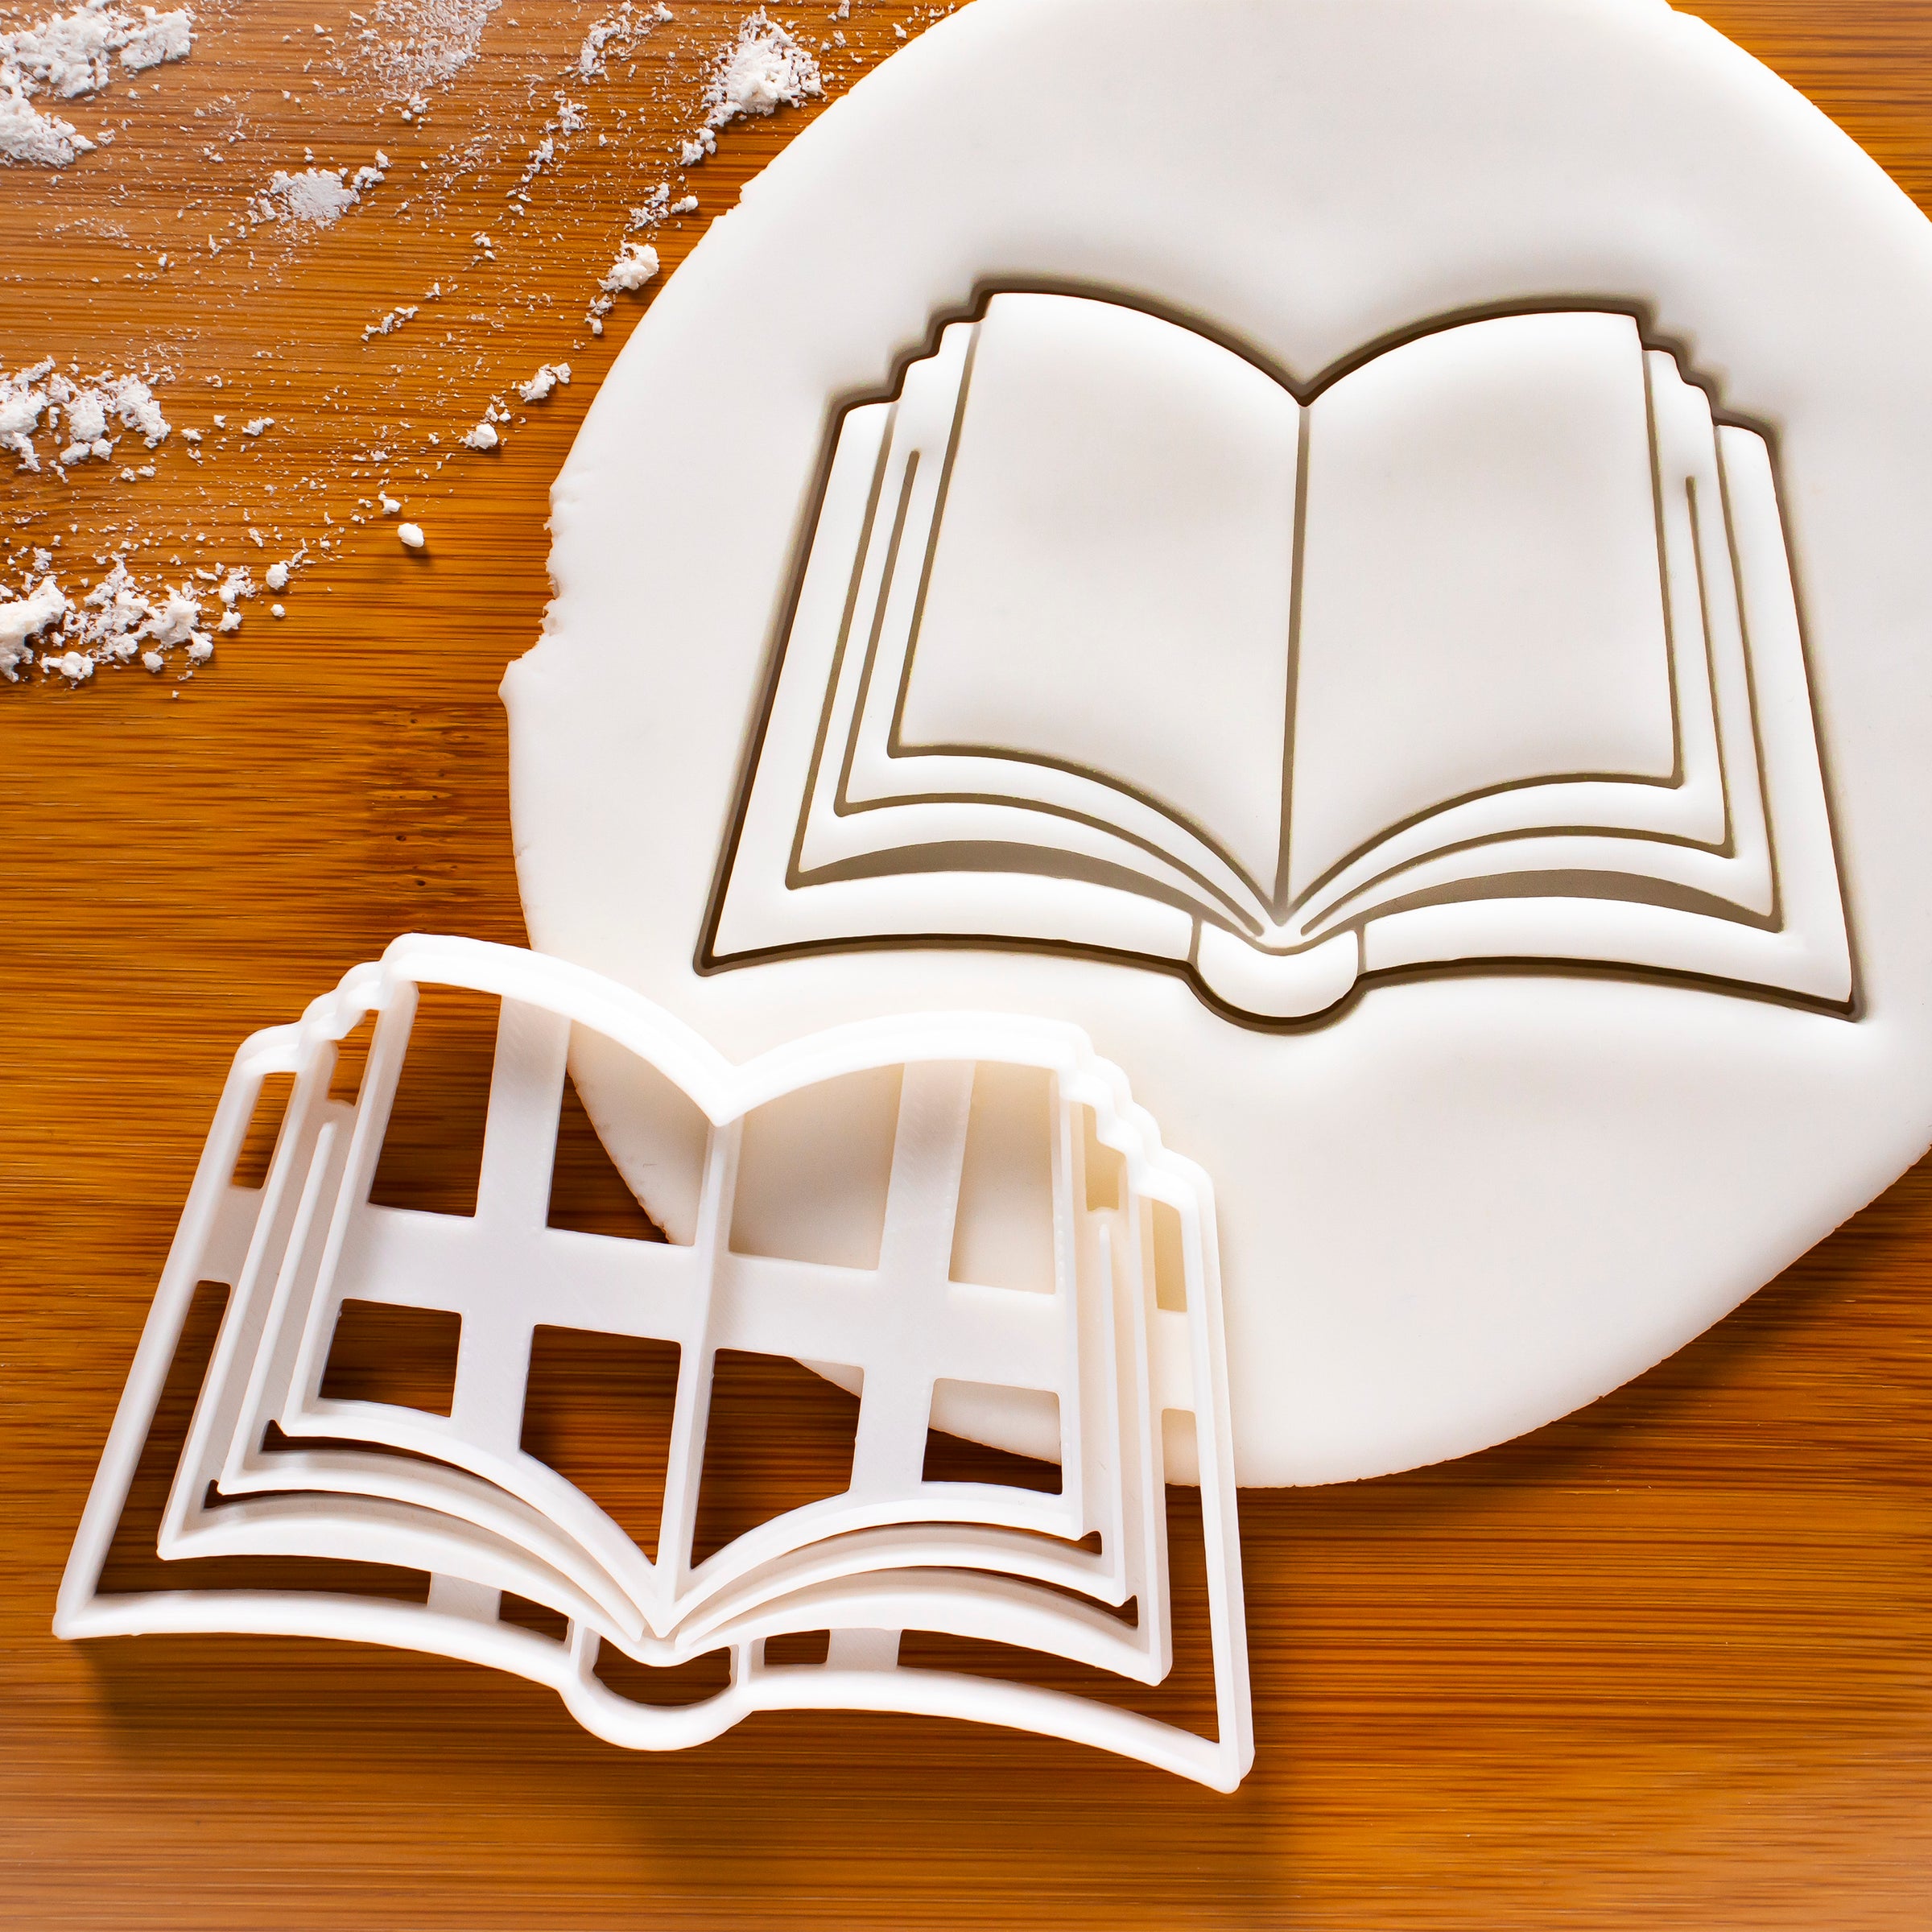 Back to School Book Cookie Cutter